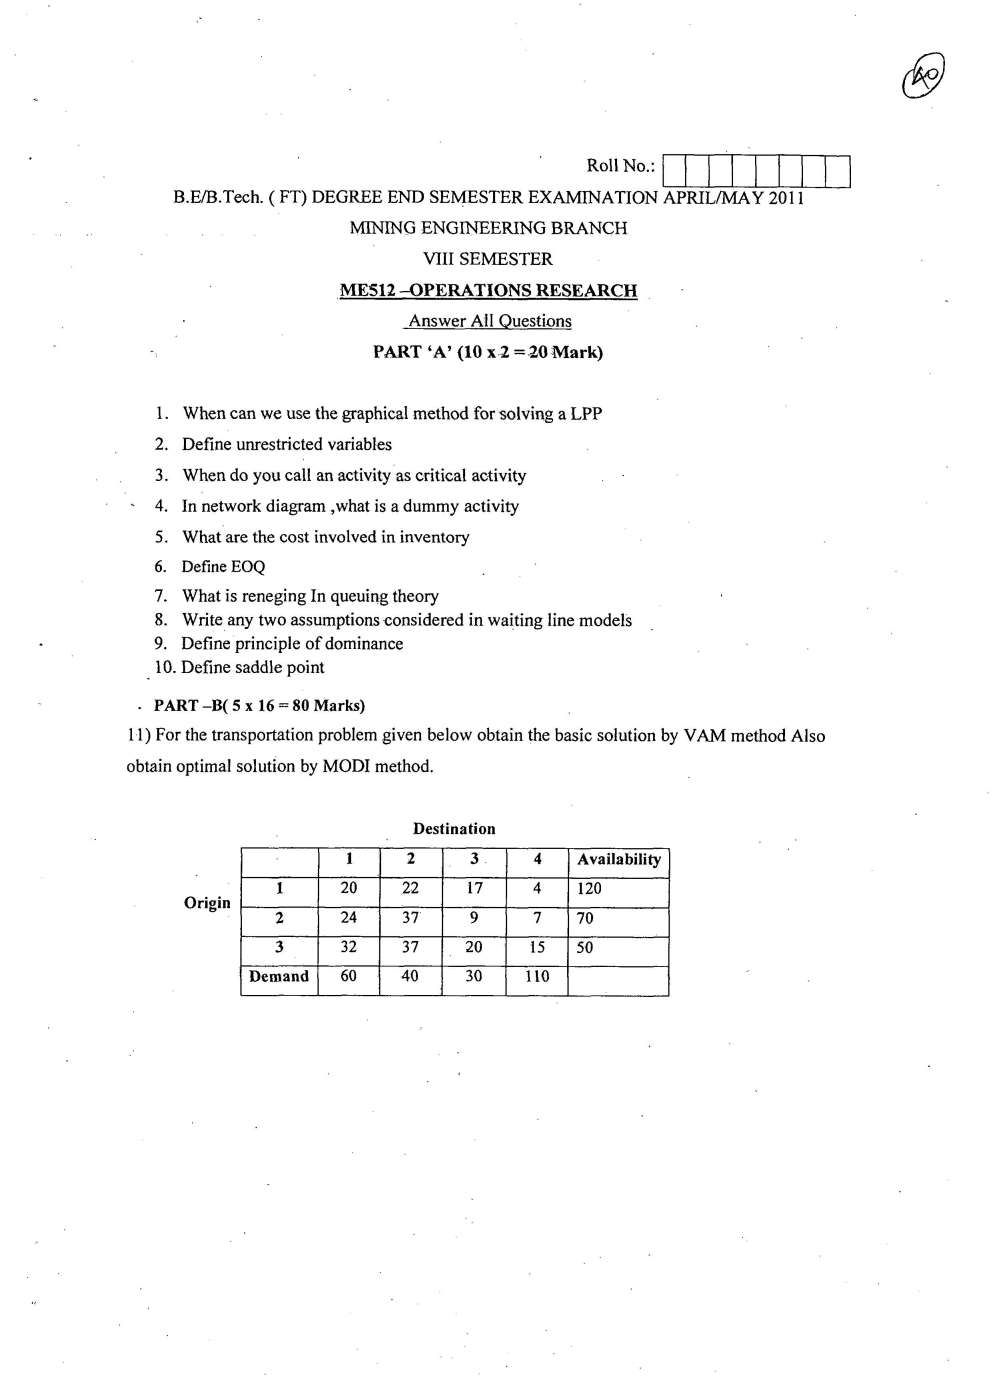 operation research question paper davv